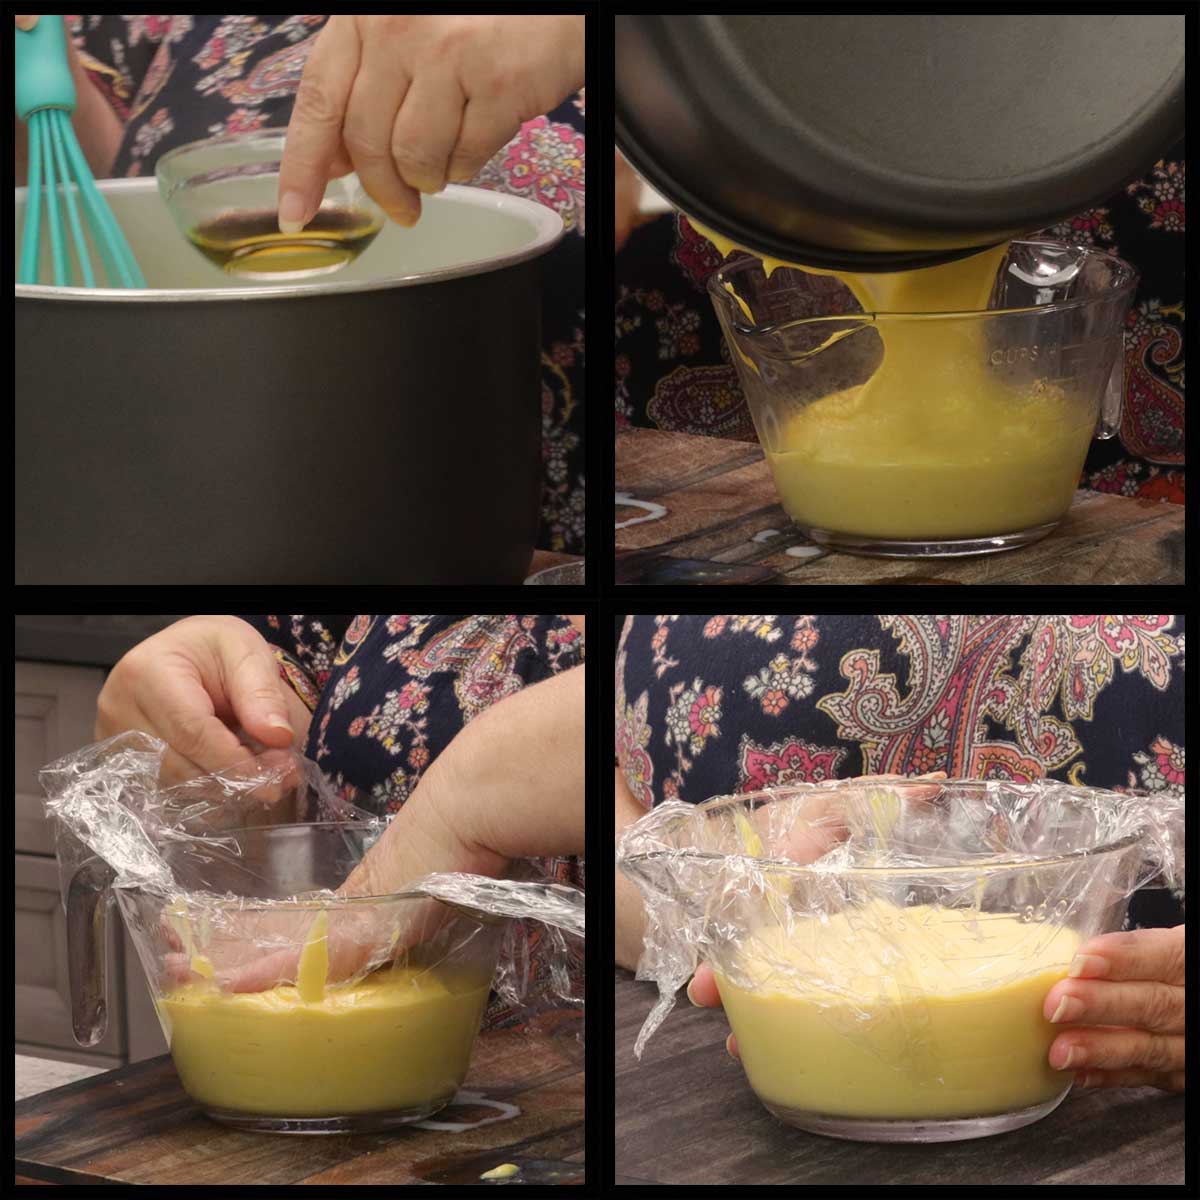 adding vanilla and covering the custard before chilling.